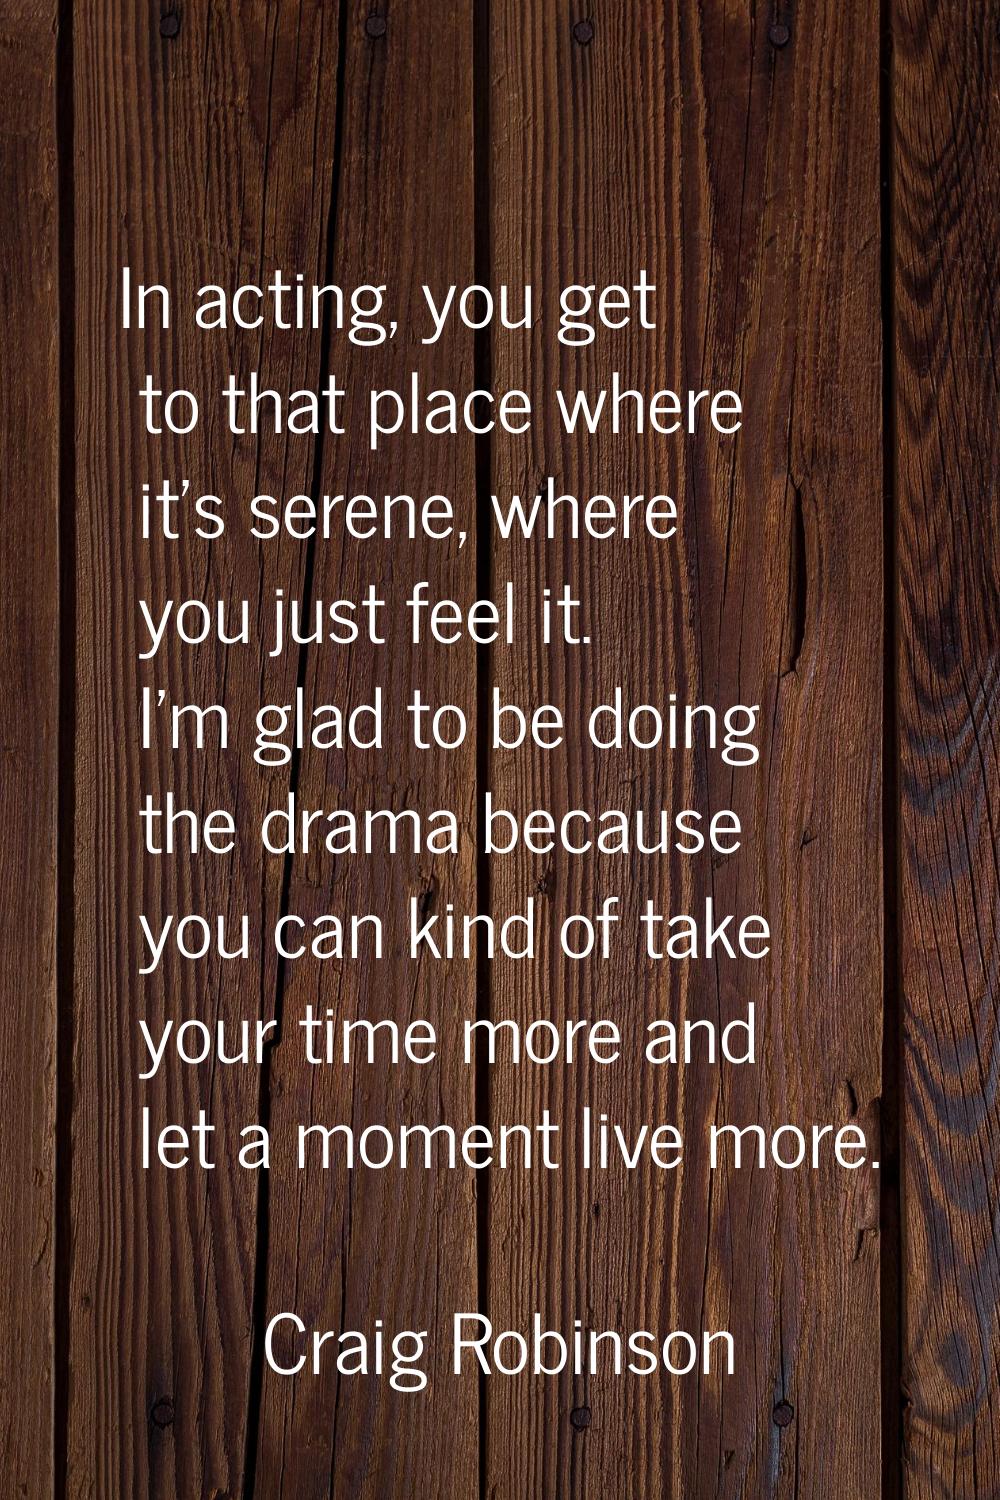 In acting, you get to that place where it's serene, where you just feel it. I'm glad to be doing th